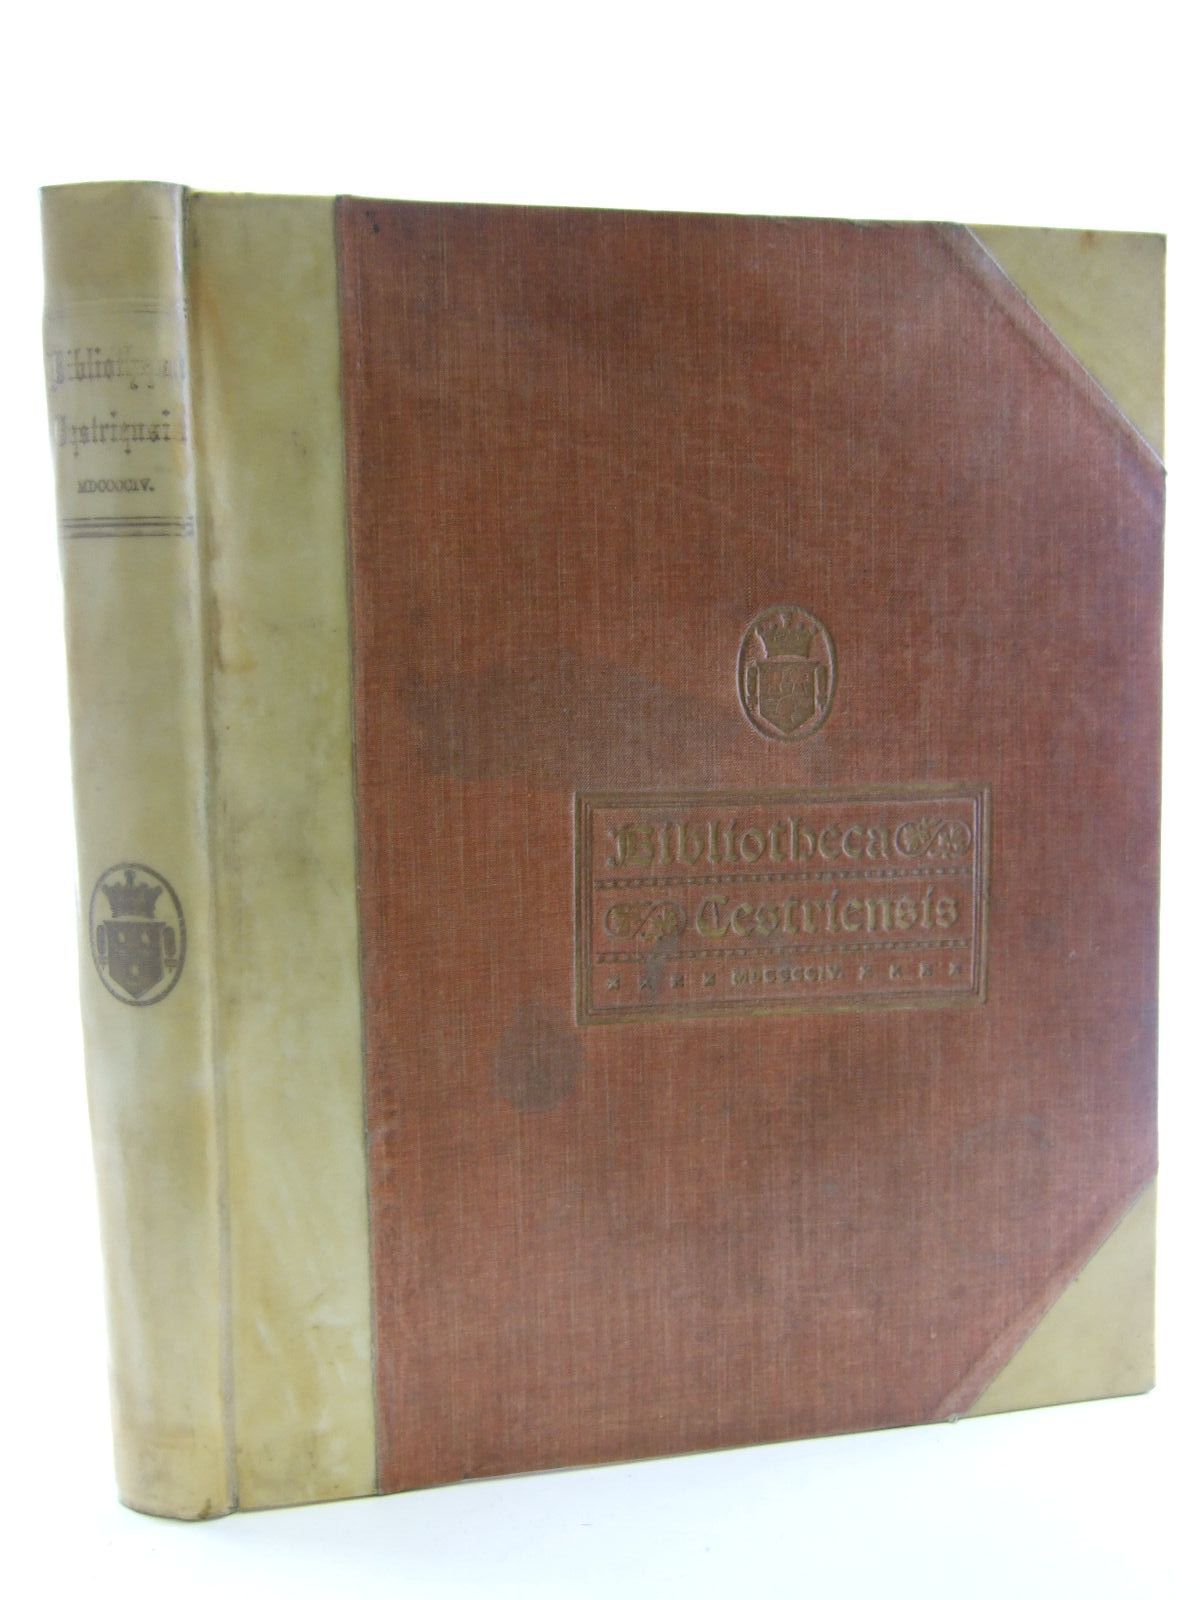 Photo of BIBLIOTHECA CESTRIENSIS written by Cooke, John H. published by Mackie & Co. Limited (STOCK CODE: 2106650)  for sale by Stella & Rose's Books